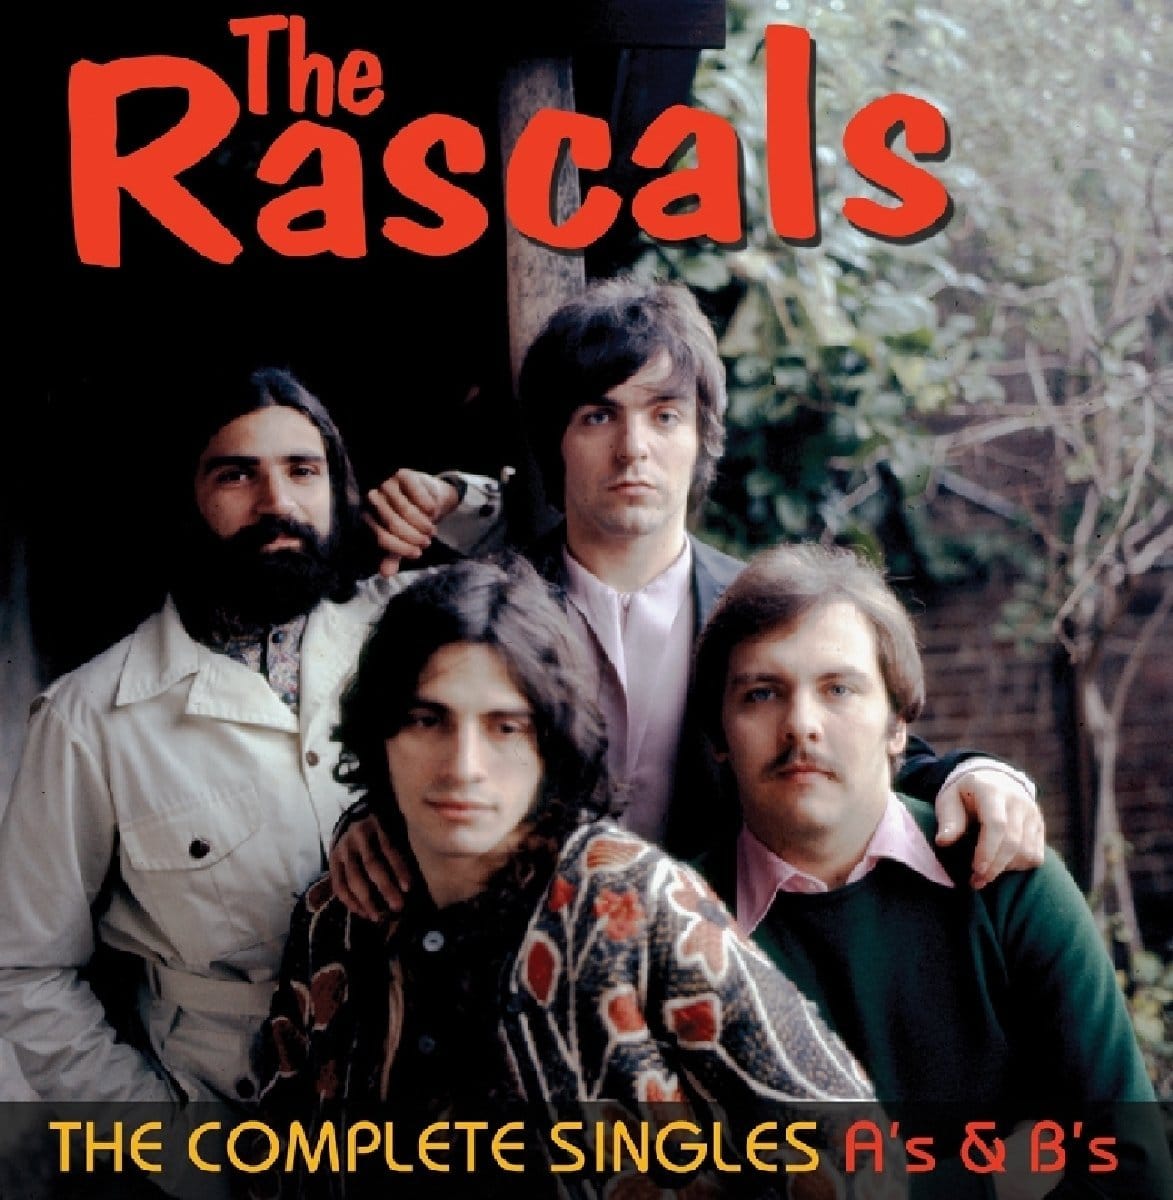 The Rascals: The Complete Singles A’s & B’s